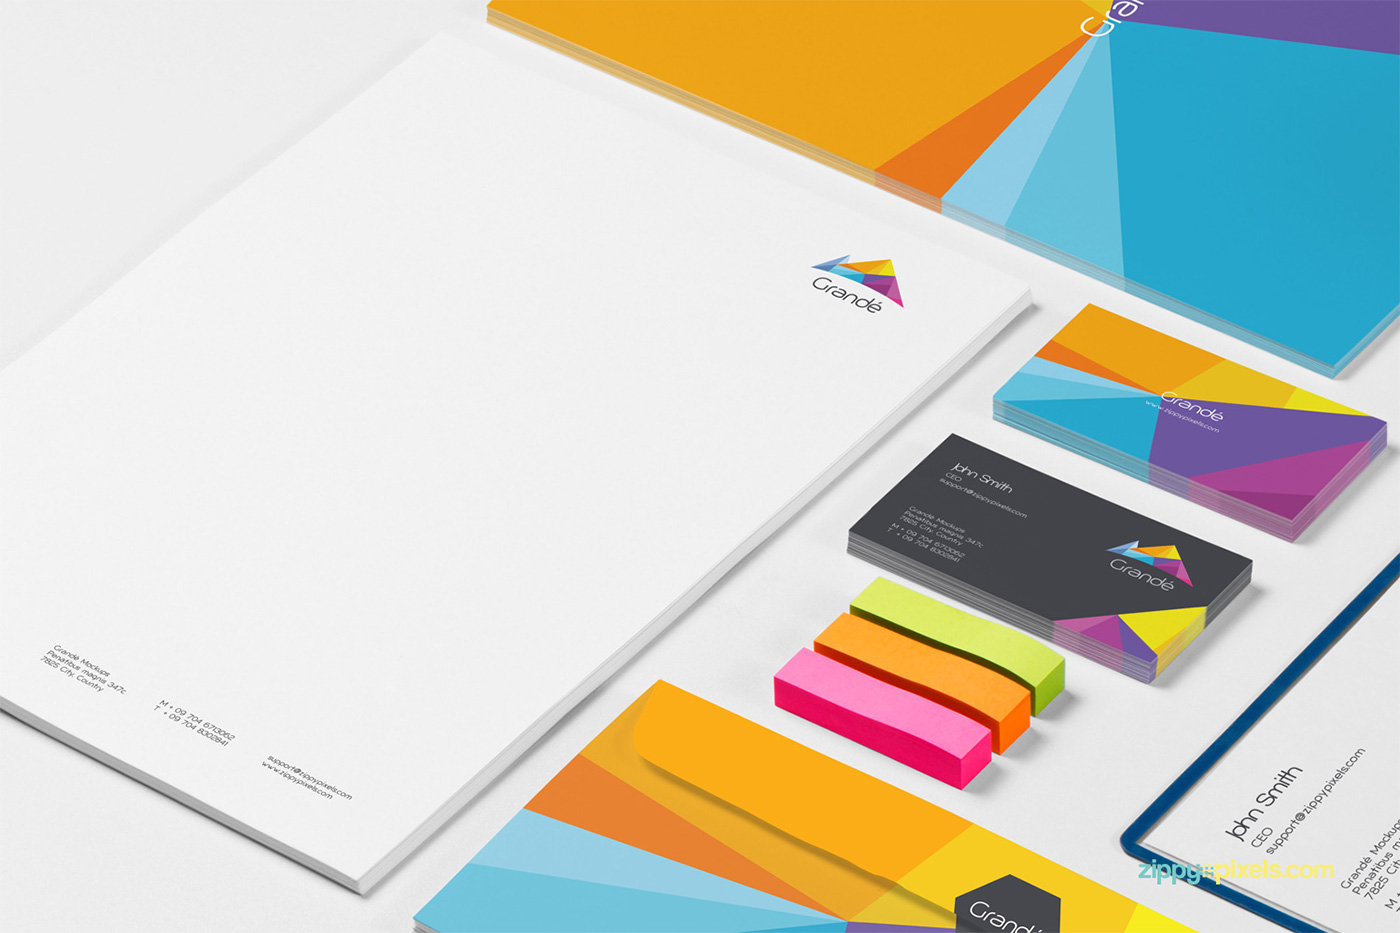 Free Download: 8 Photorealistic Stationery Branding PSD Mockups